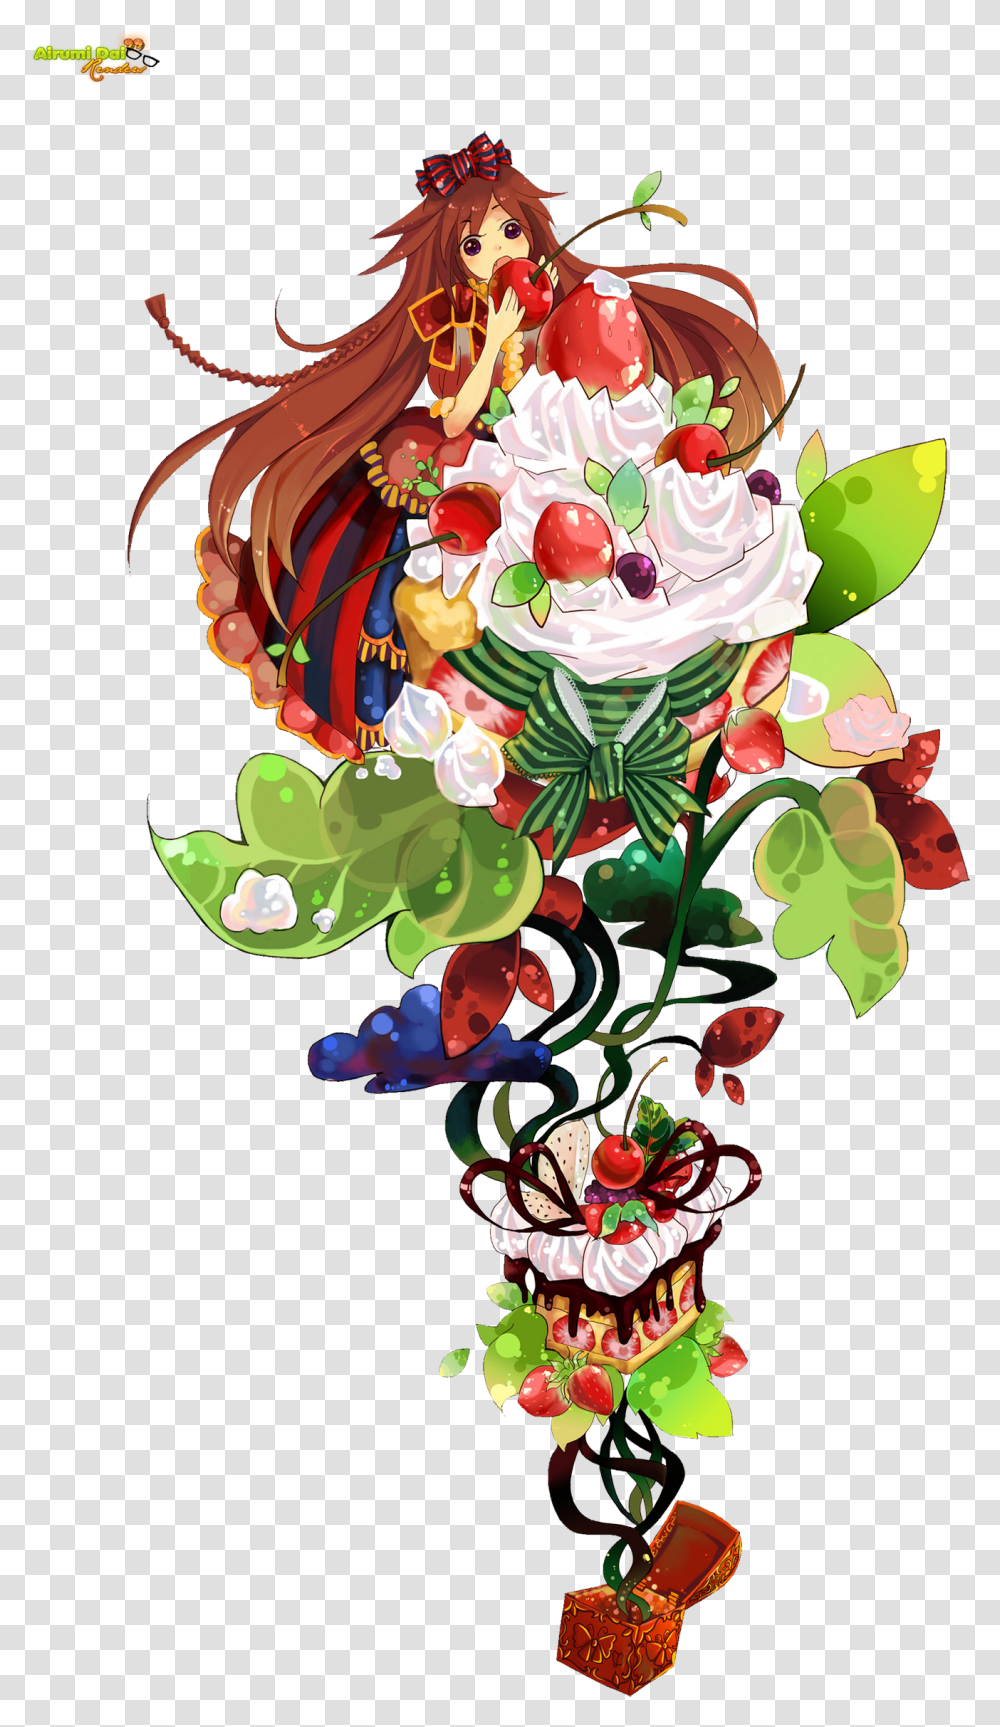 Download Aliceeating Render By Airumidai Render Anime Eat Anime Eating Renders, Graphics, Art, Floral Design, Pattern Transparent Png